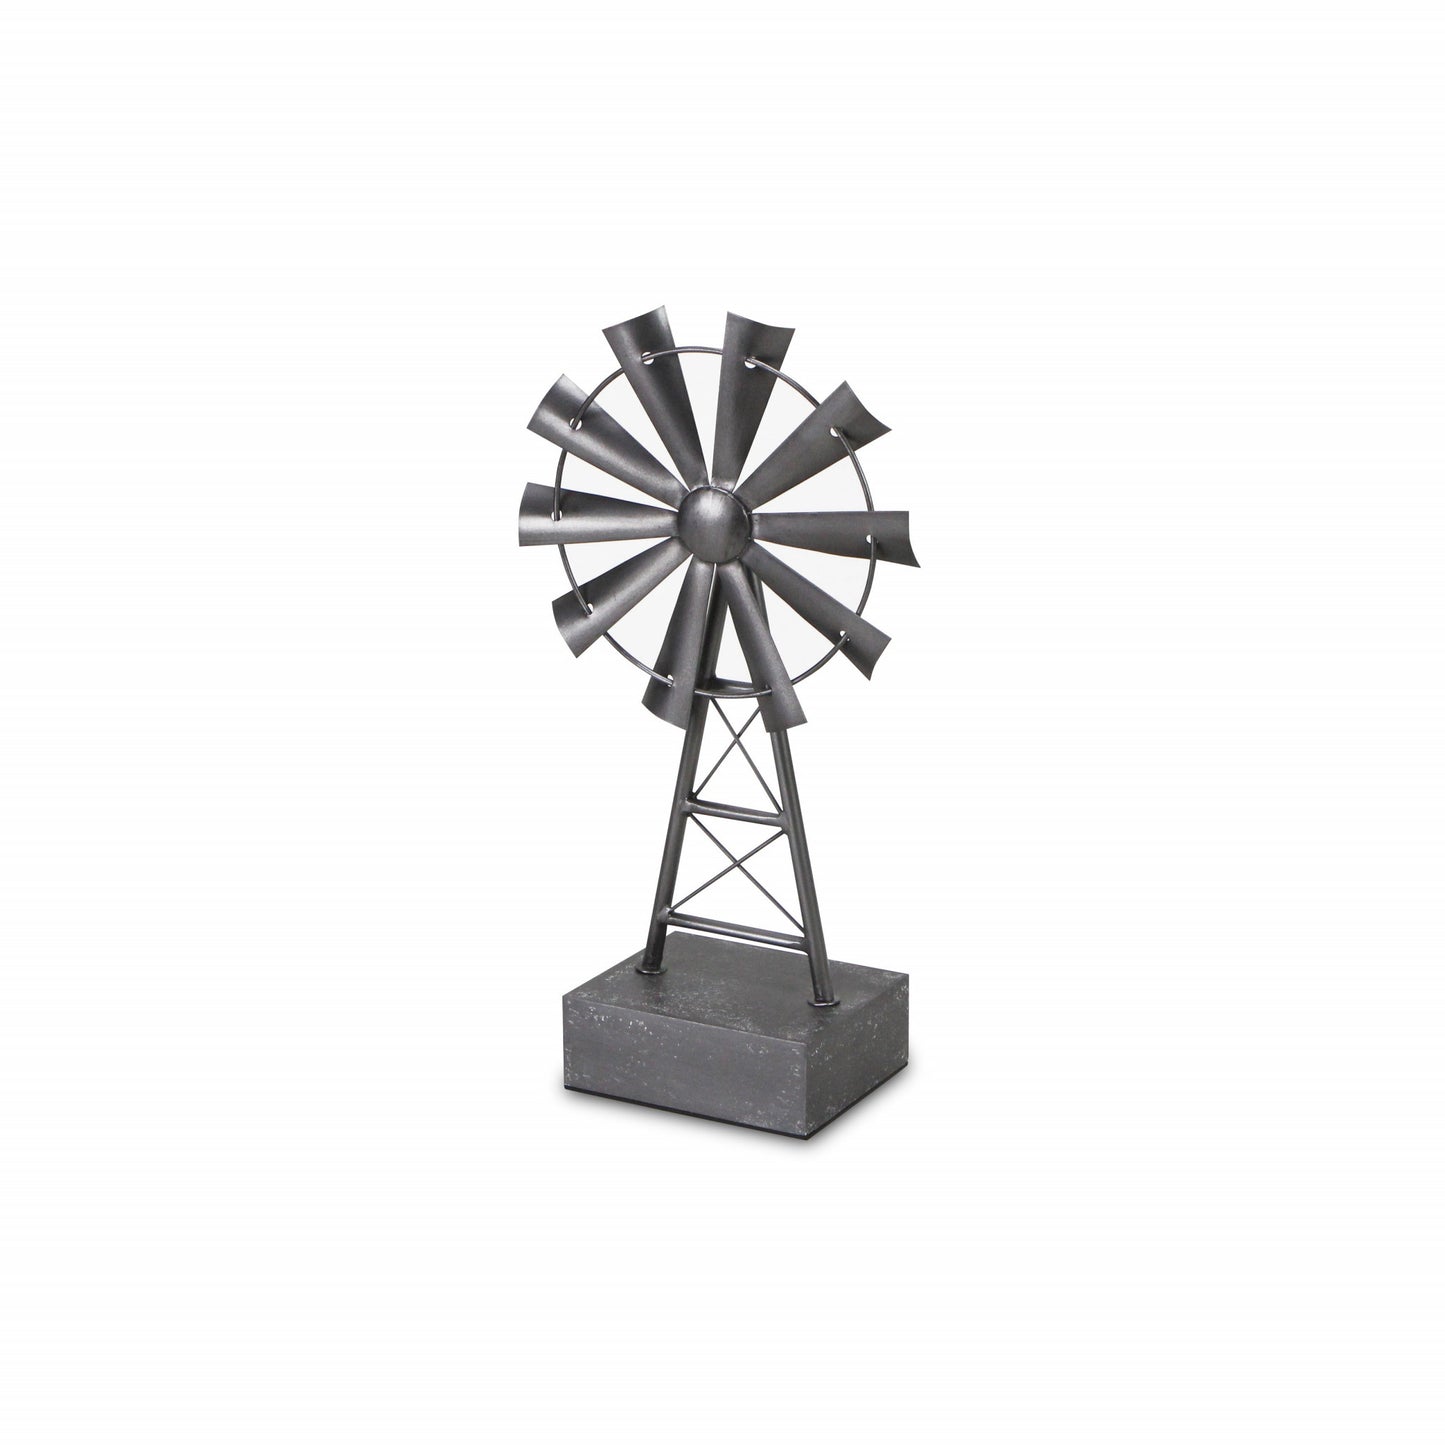 17" Gray Metal Windmill Hand Painted Sculpture